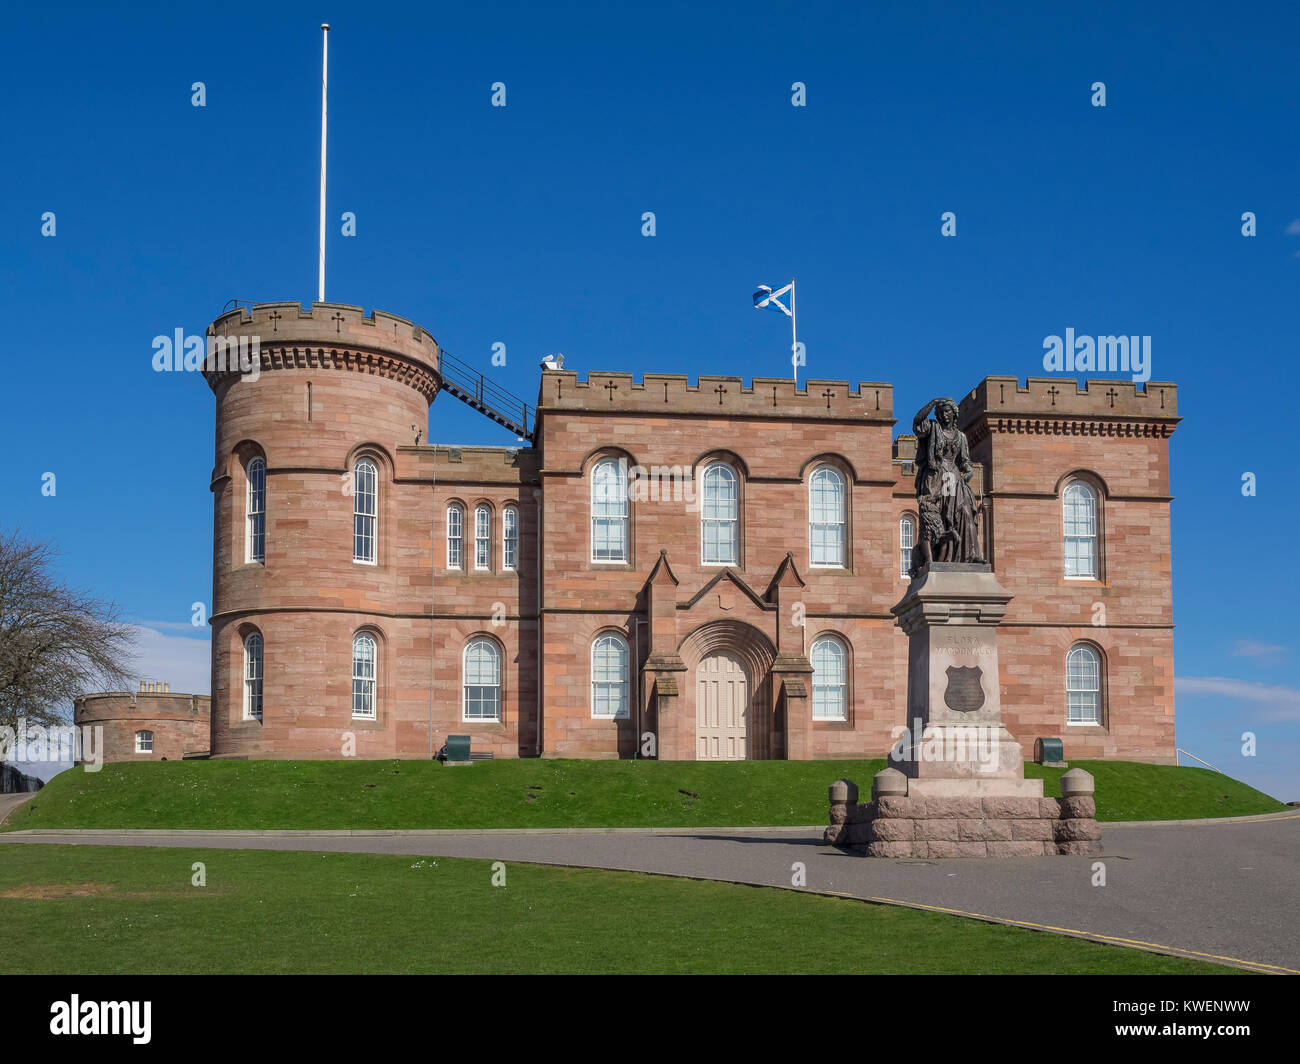 Inverness Castle and the statue of Flora MacDonald. The castle is currently used as Inverness Sheriff court. Built in 1836 by architect William Burn. Stock Photo